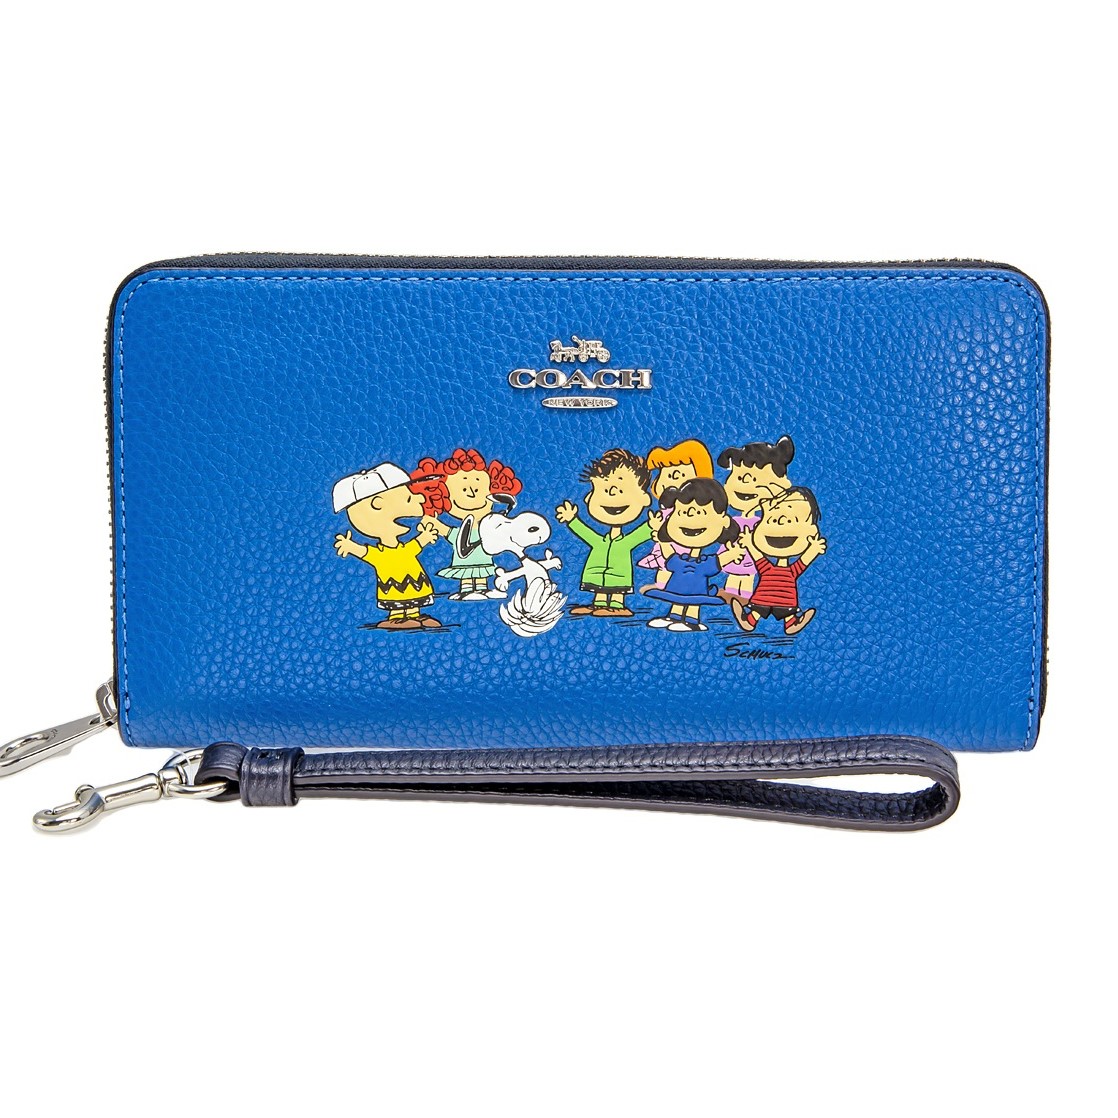 VÍ NỮ DÀI COACH X PEANUTS LONG ZIP AROUND WALLET WITH SNOOPY AND FRIENDS 5